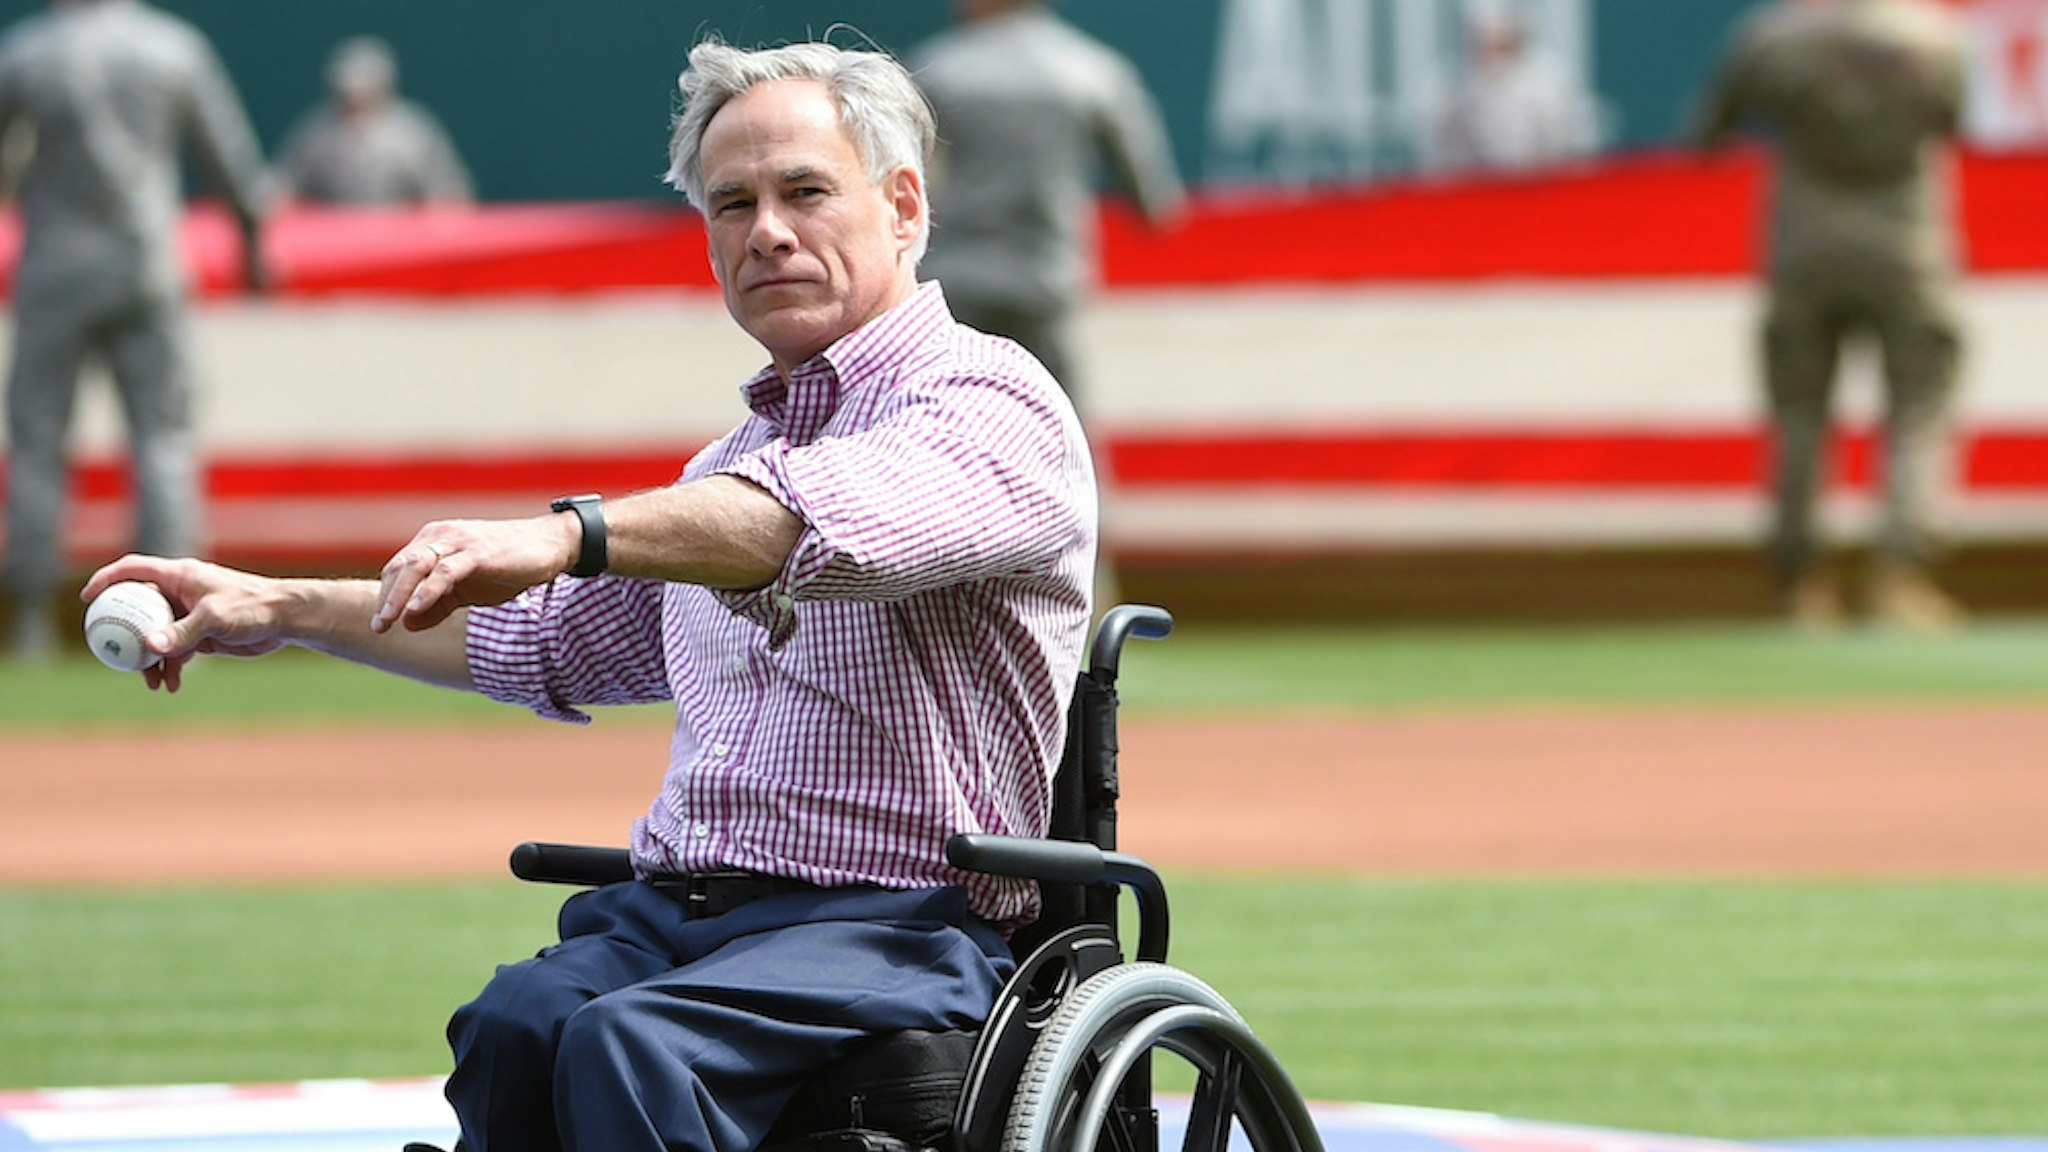 ARLINGTON, TX - MARCH 28: Texas Governor Greg Abbott throws out the ceremonial first pitch before the game between the Chicago Cubs and the Texas Rangers at Globe Life Park in Arlington on Thursday, March 28, 2019 in Arlington, Texas. (Photo by Cooper Neill/MLB Photos via Getty Images)